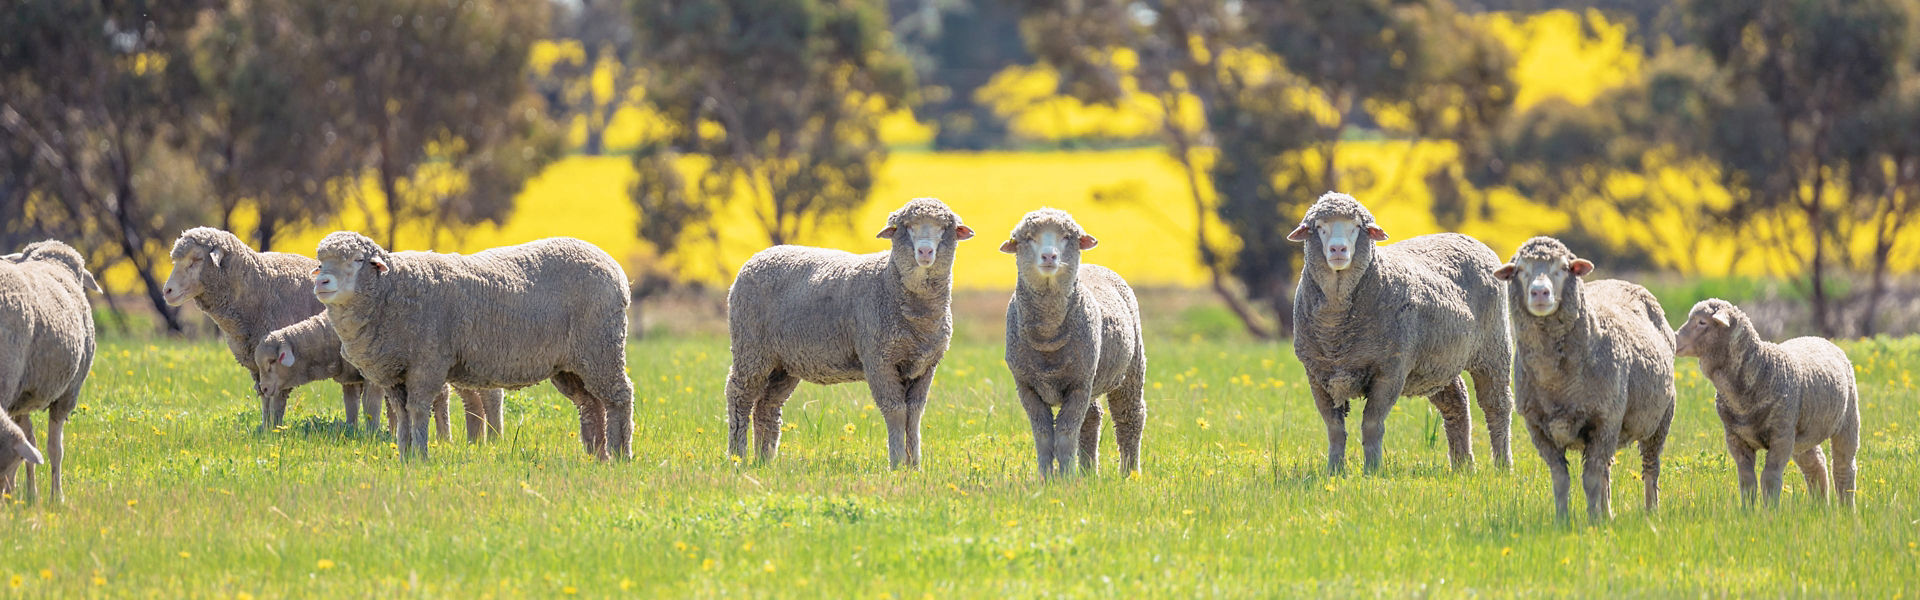 Sheep standing in field covered in yellow flowers in Perth, Western Australia, looking at camera